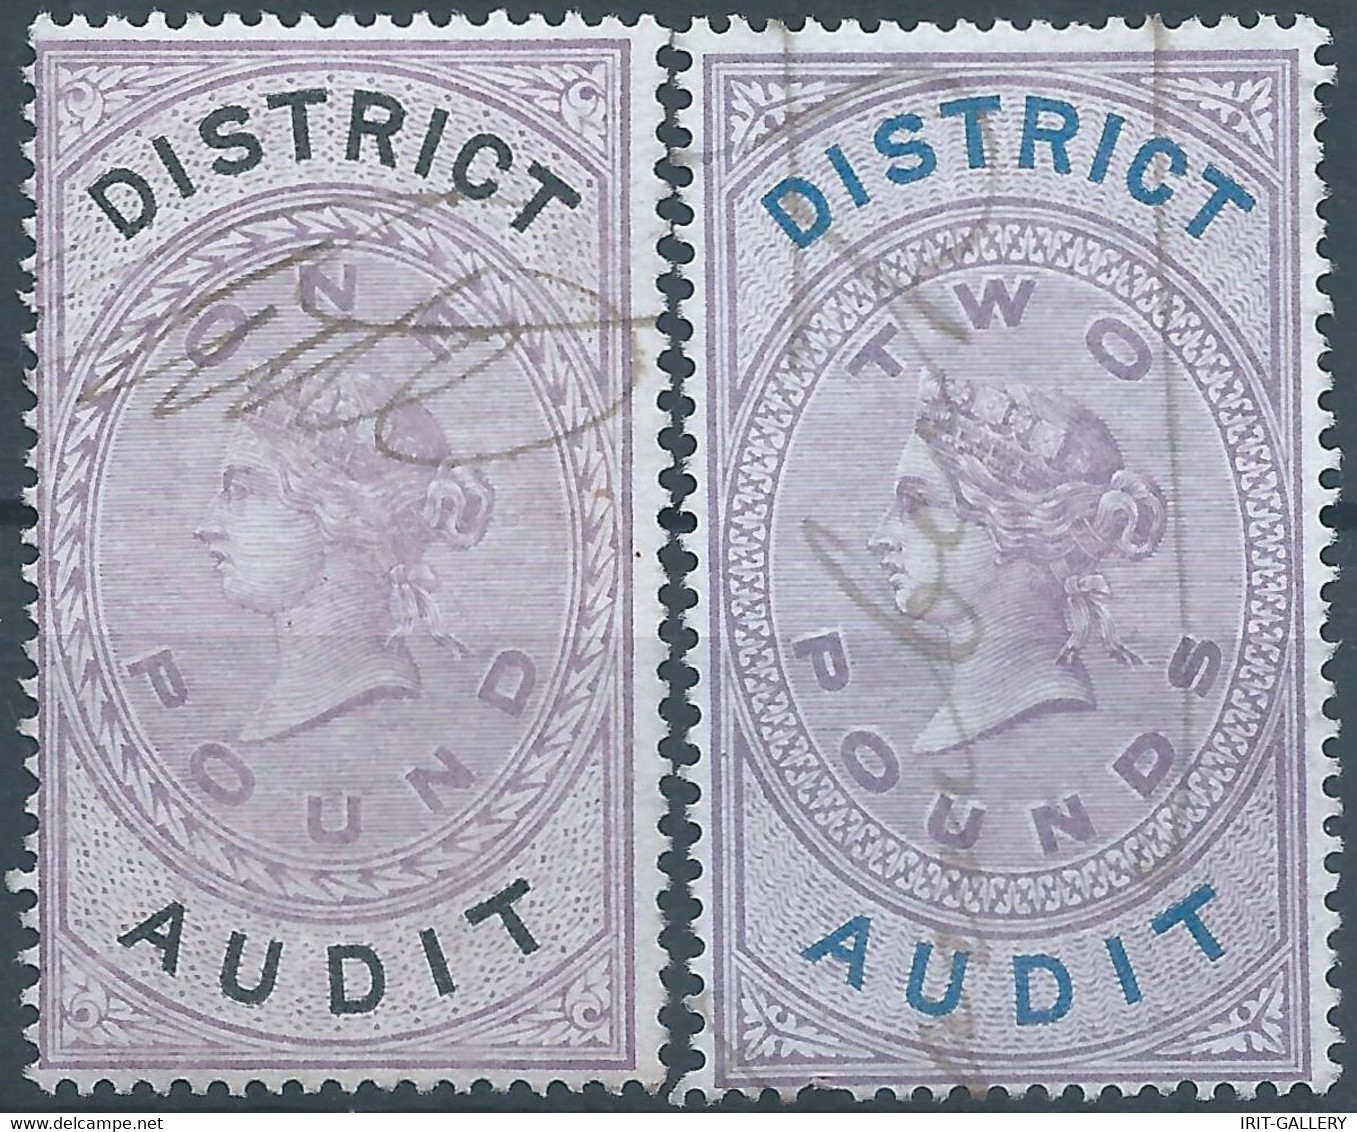 Great Britain-ENGLAND,Queen Victoria,1880-1900 Revenue Stamp Tax Fisca DISTRICT AUDIT,1&2 Pounds,Used - Revenue Stamps